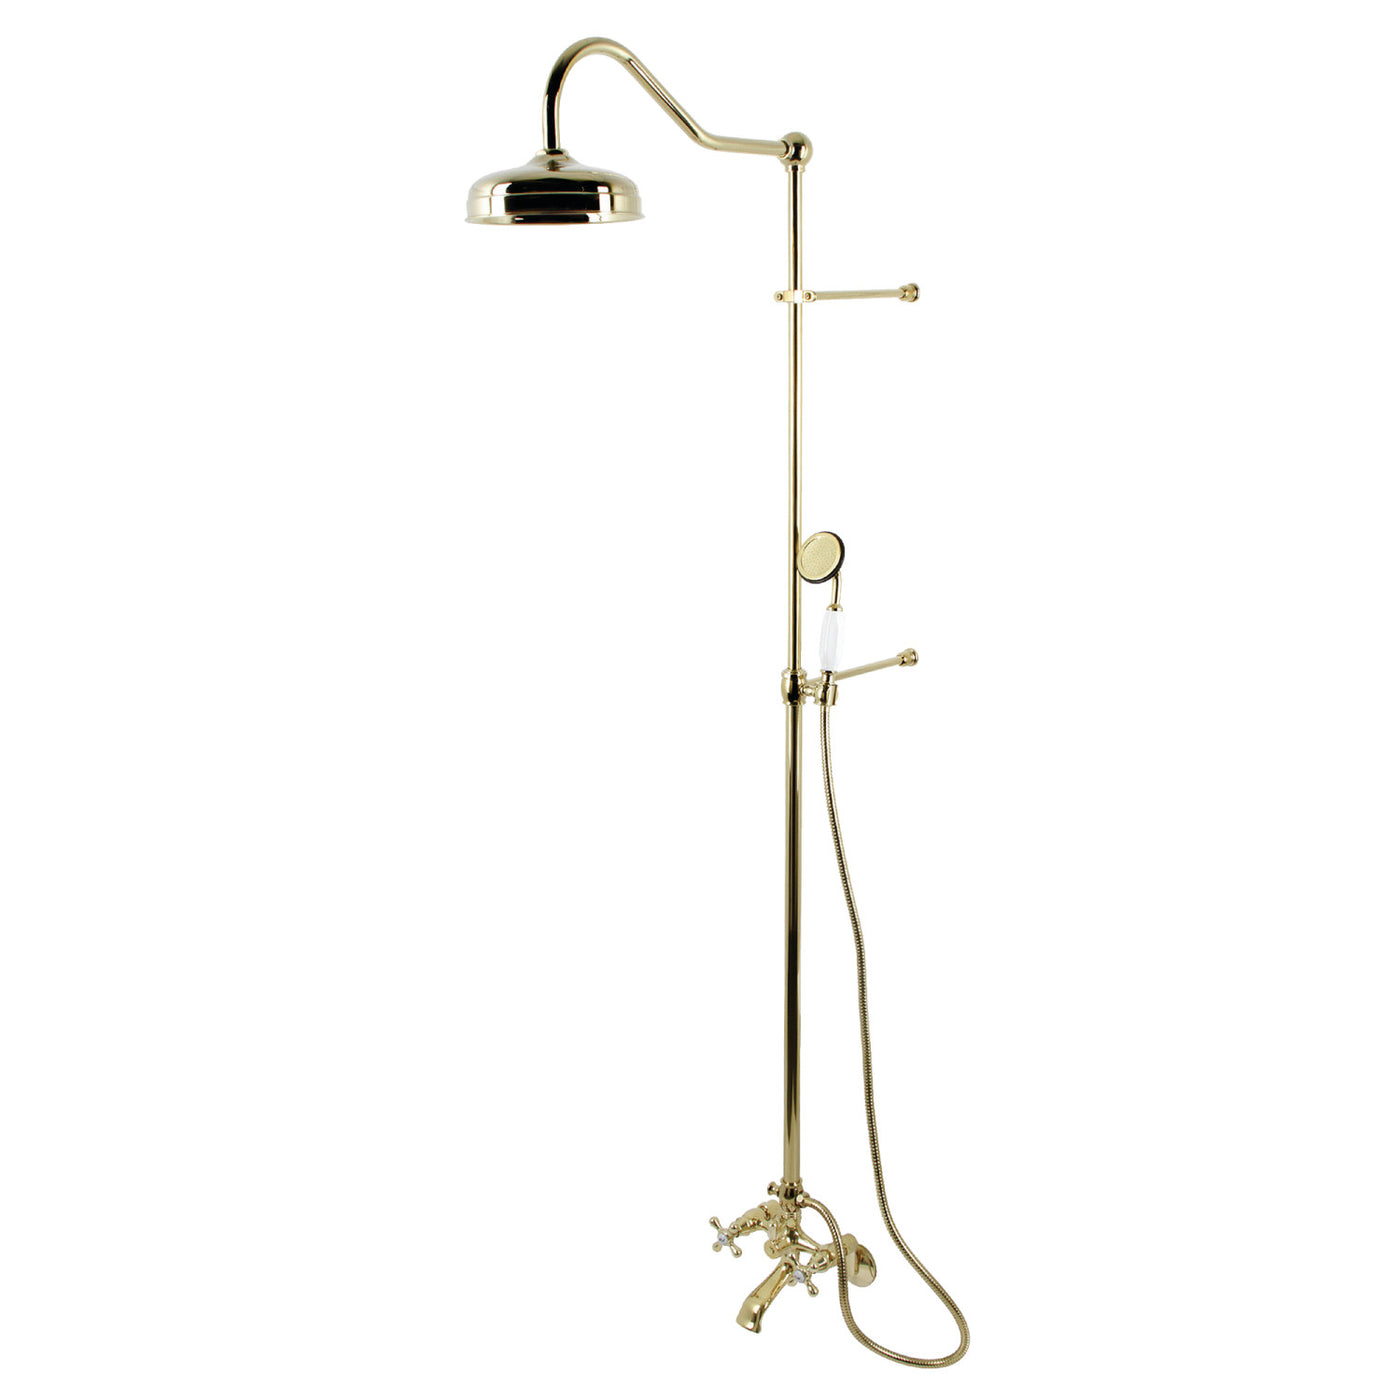 Elements of Design EDK2662 Clawfoot Tub Faucet Package with Shower Combo, Polished Brass